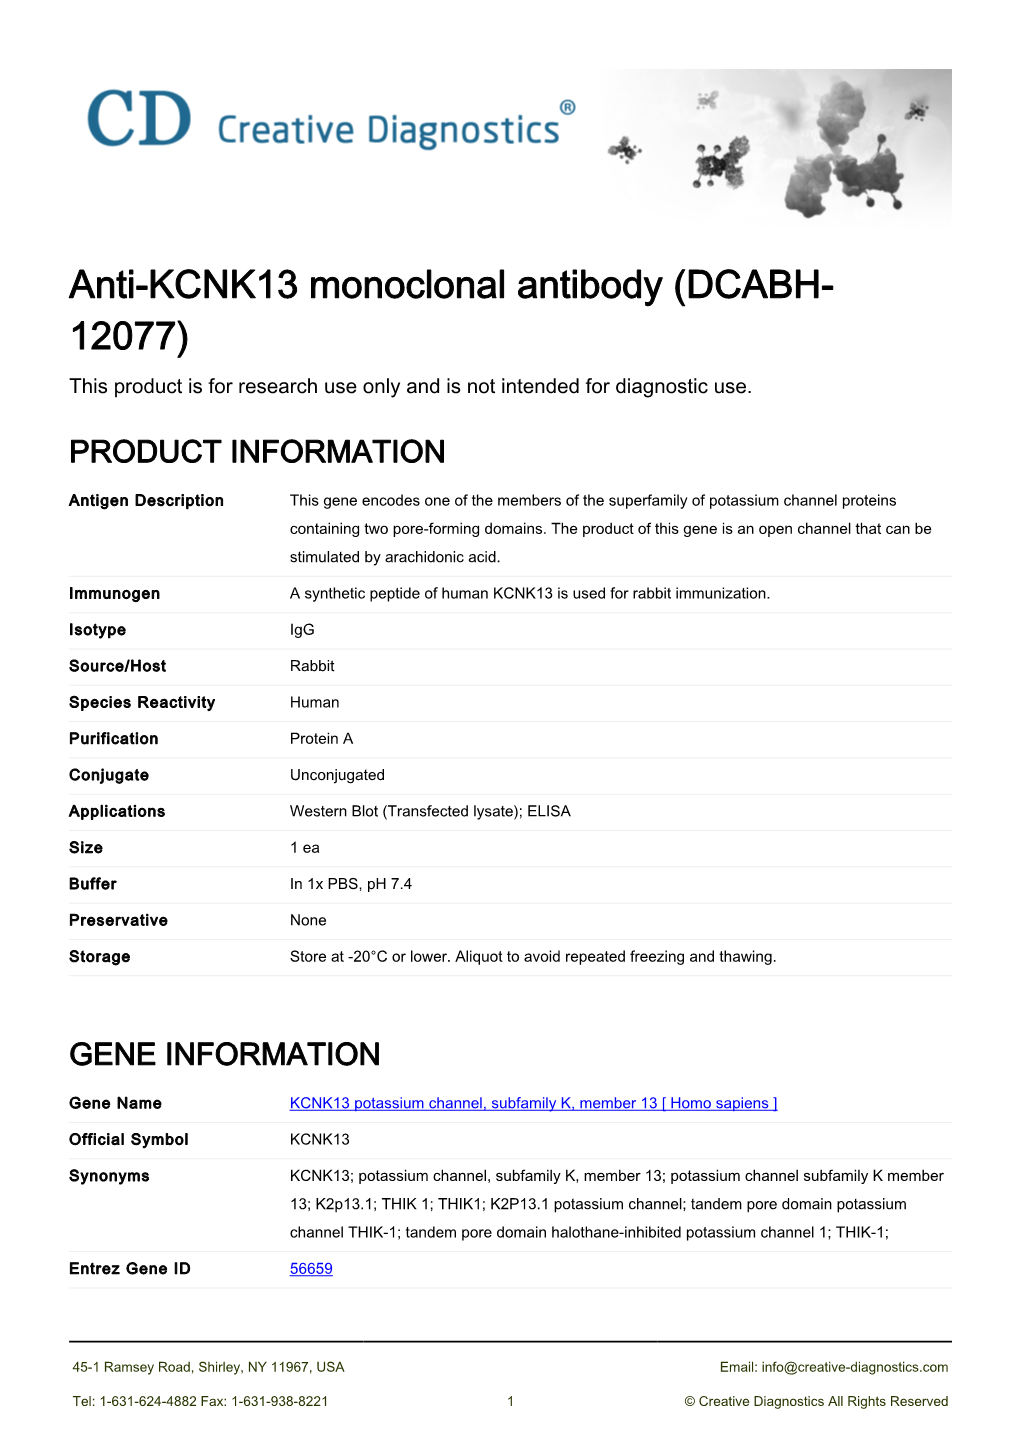 Anti-KCNK13 Monoclonal Antibody (DCABH- 12077) This Product Is for Research Use Only and Is Not Intended for Diagnostic Use